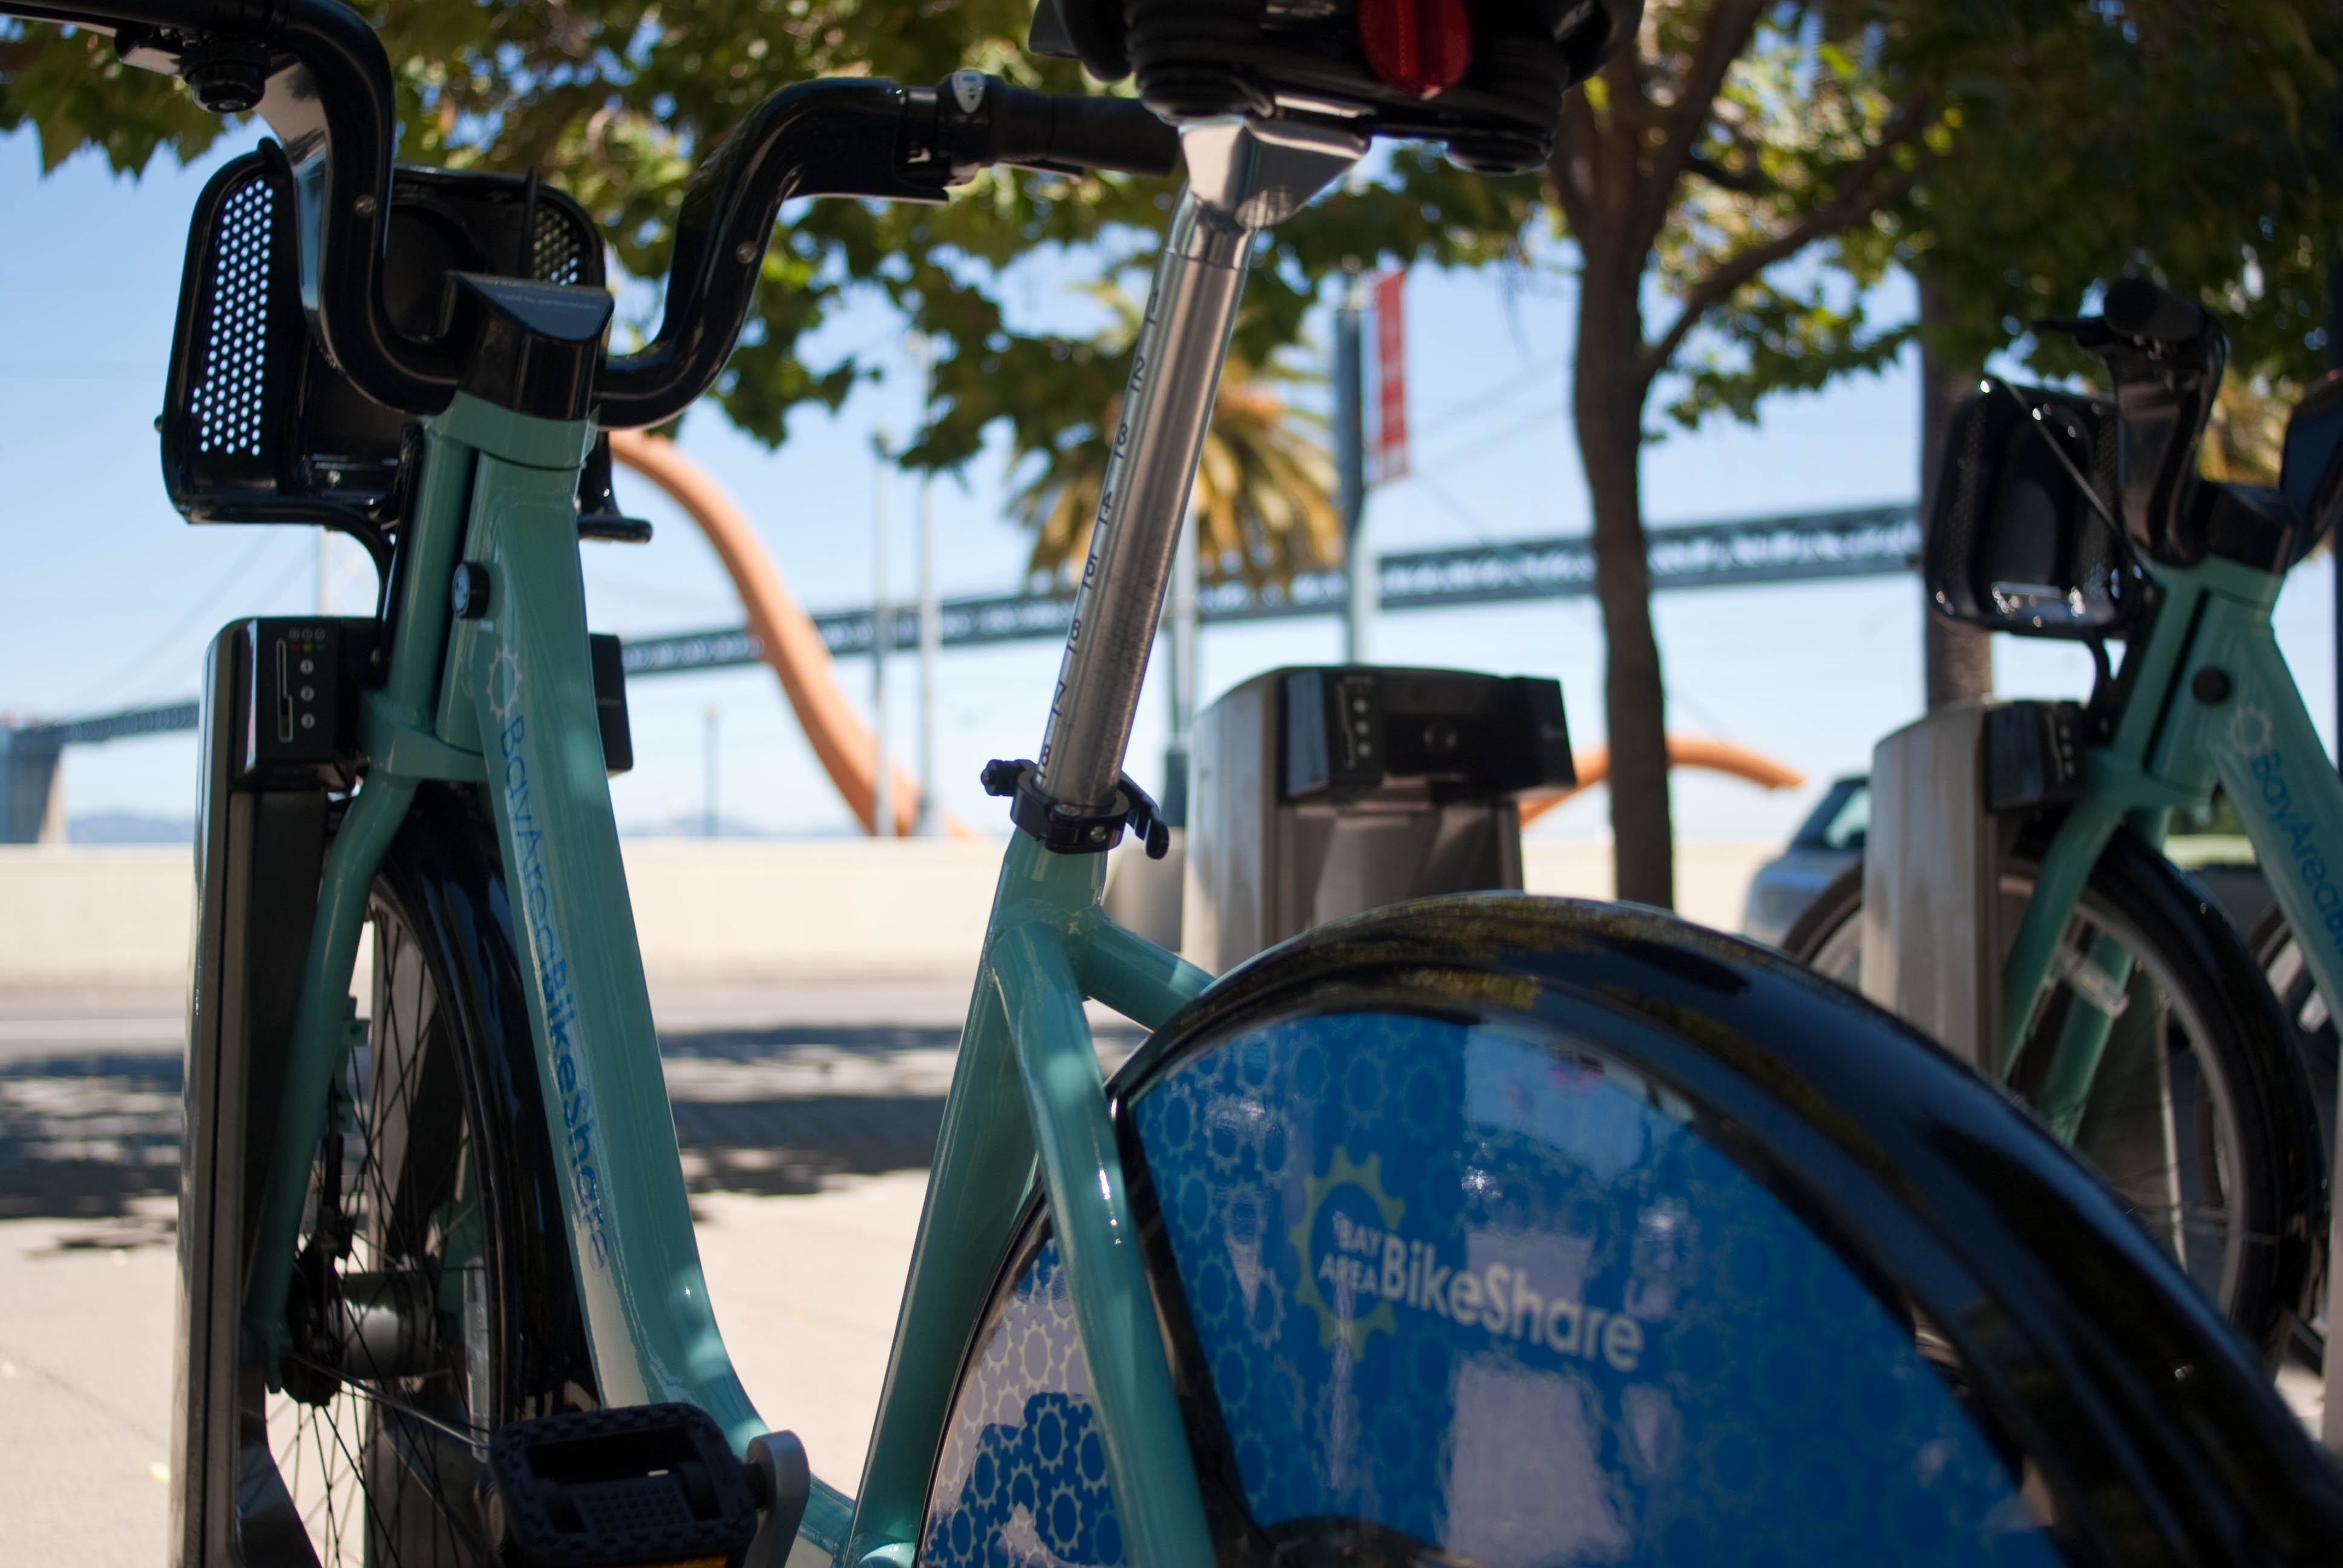 20600 In 11. Embarcadero at Folsom - Bow and Seatpost